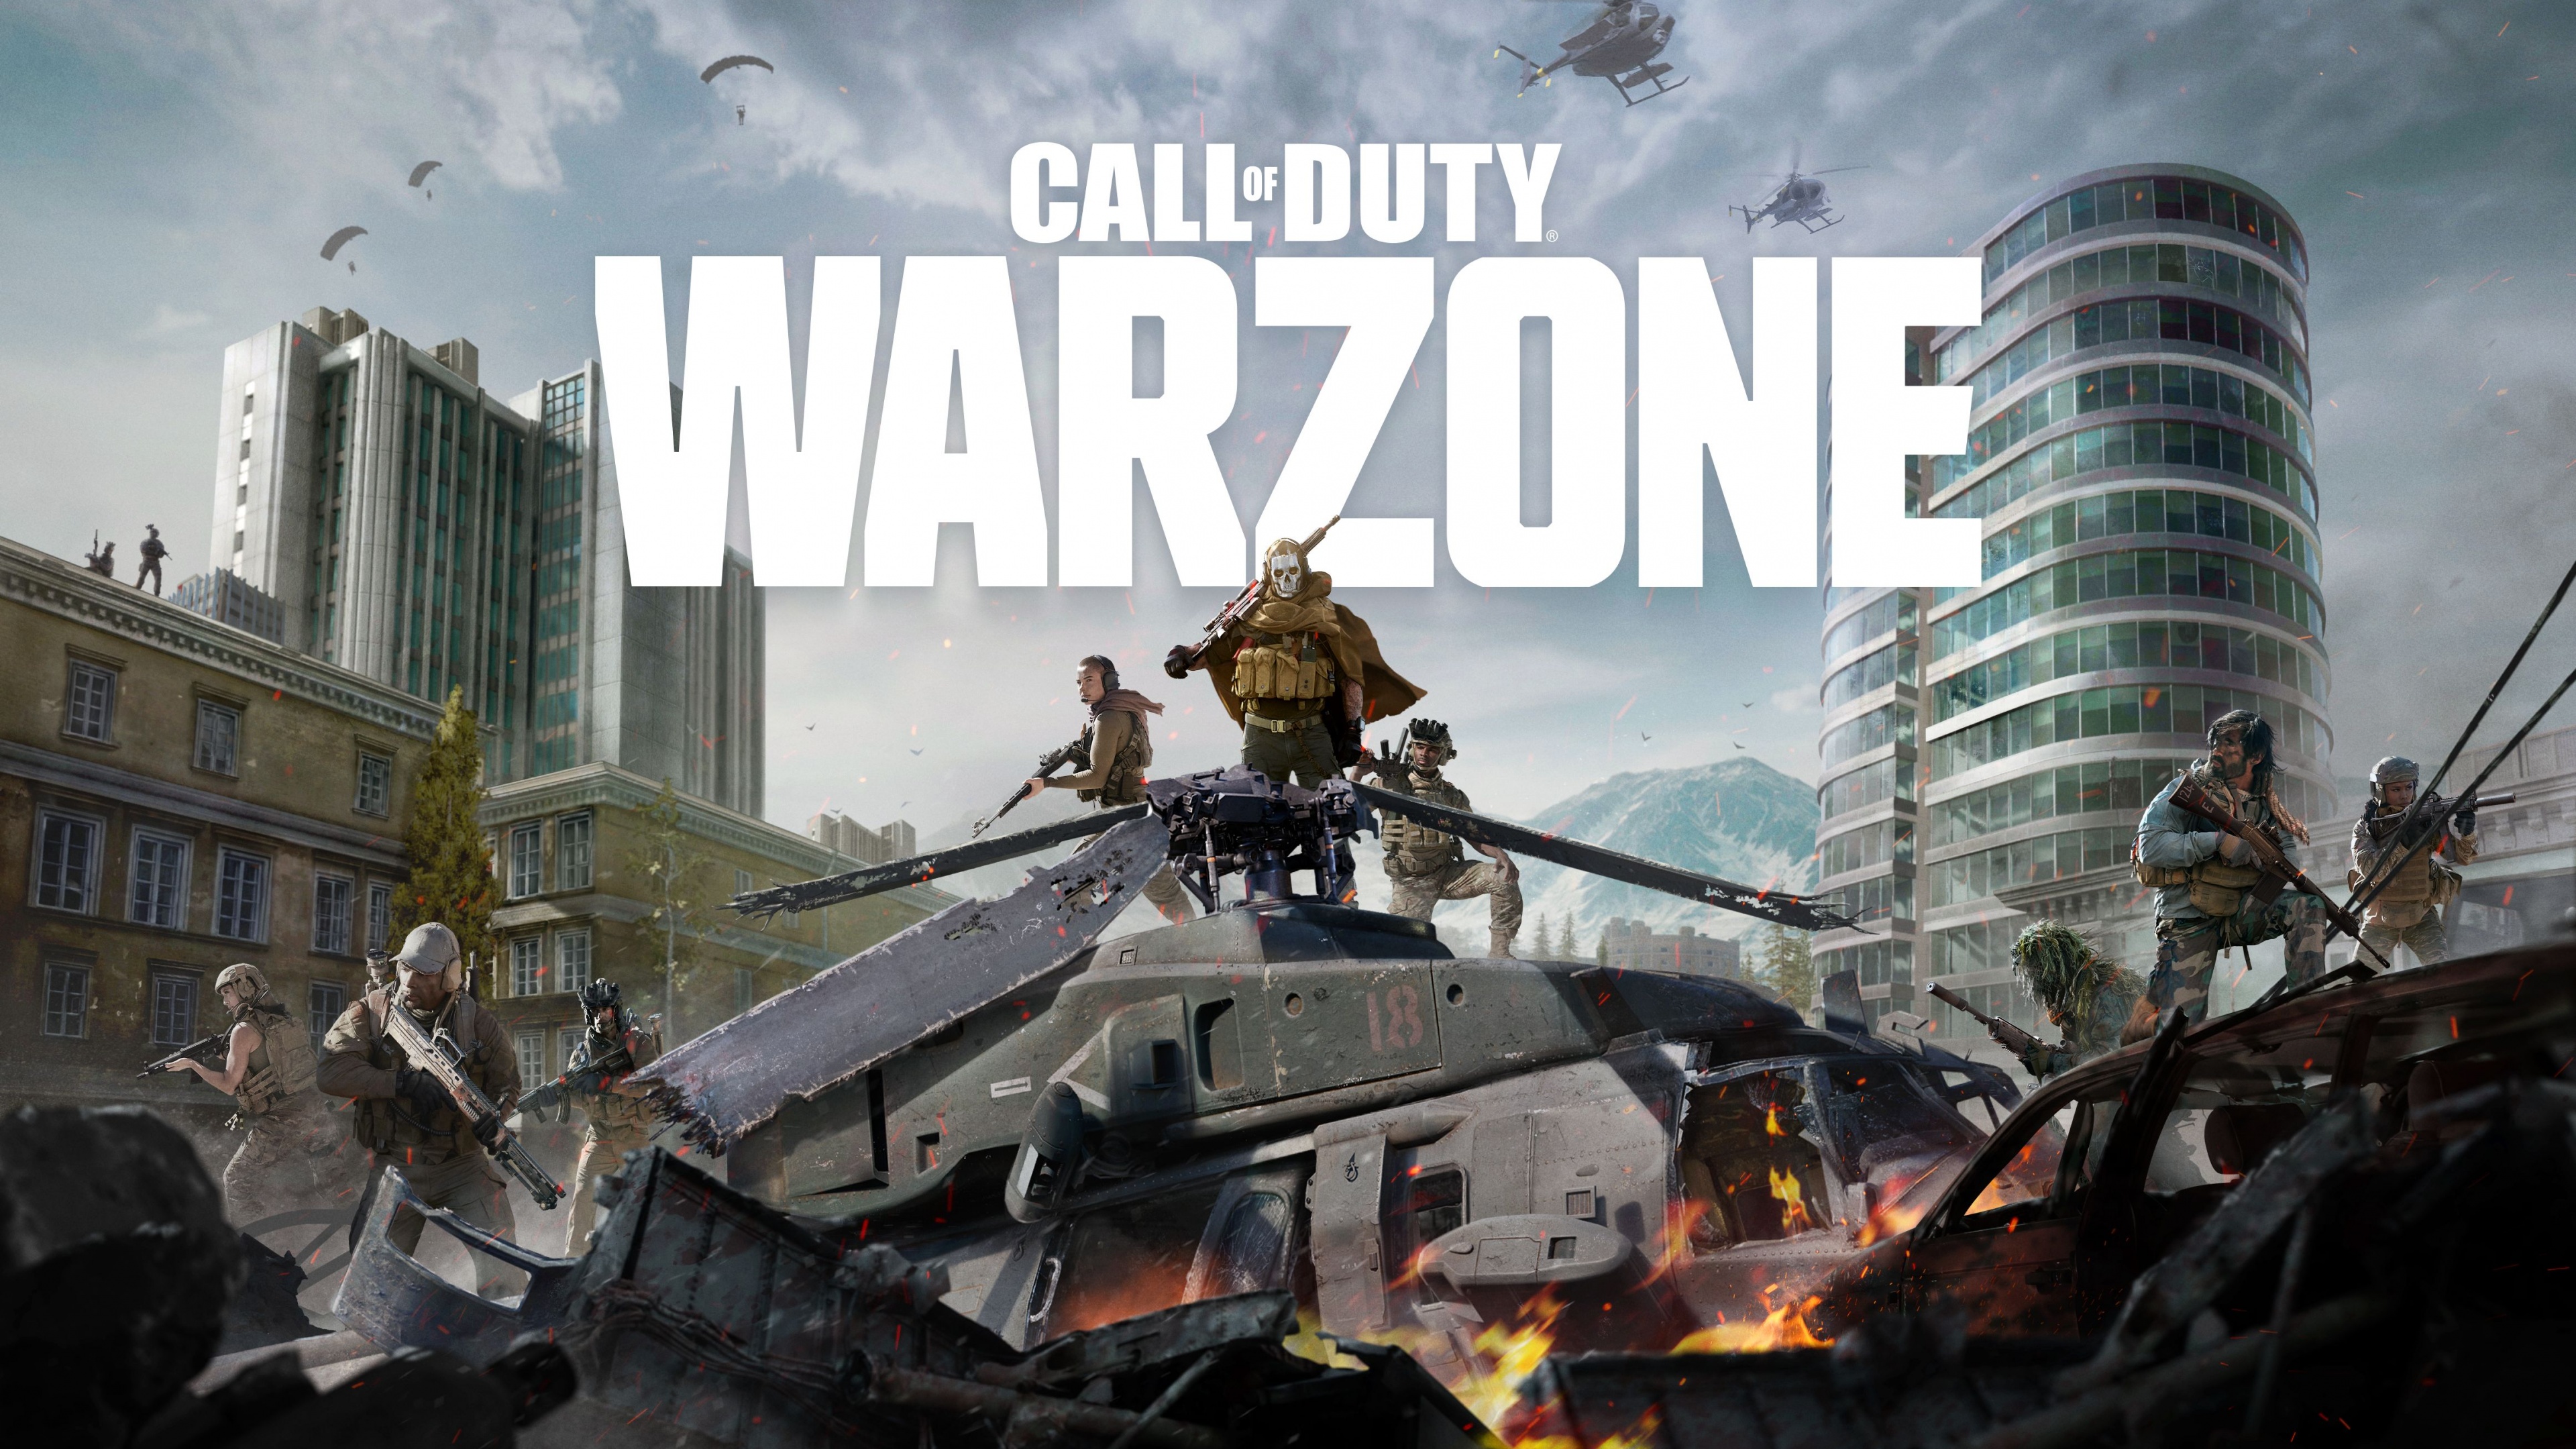 Call of Duty Warzone Wallpaper 4K, Xbox One, PlayStation 4, Games, #224